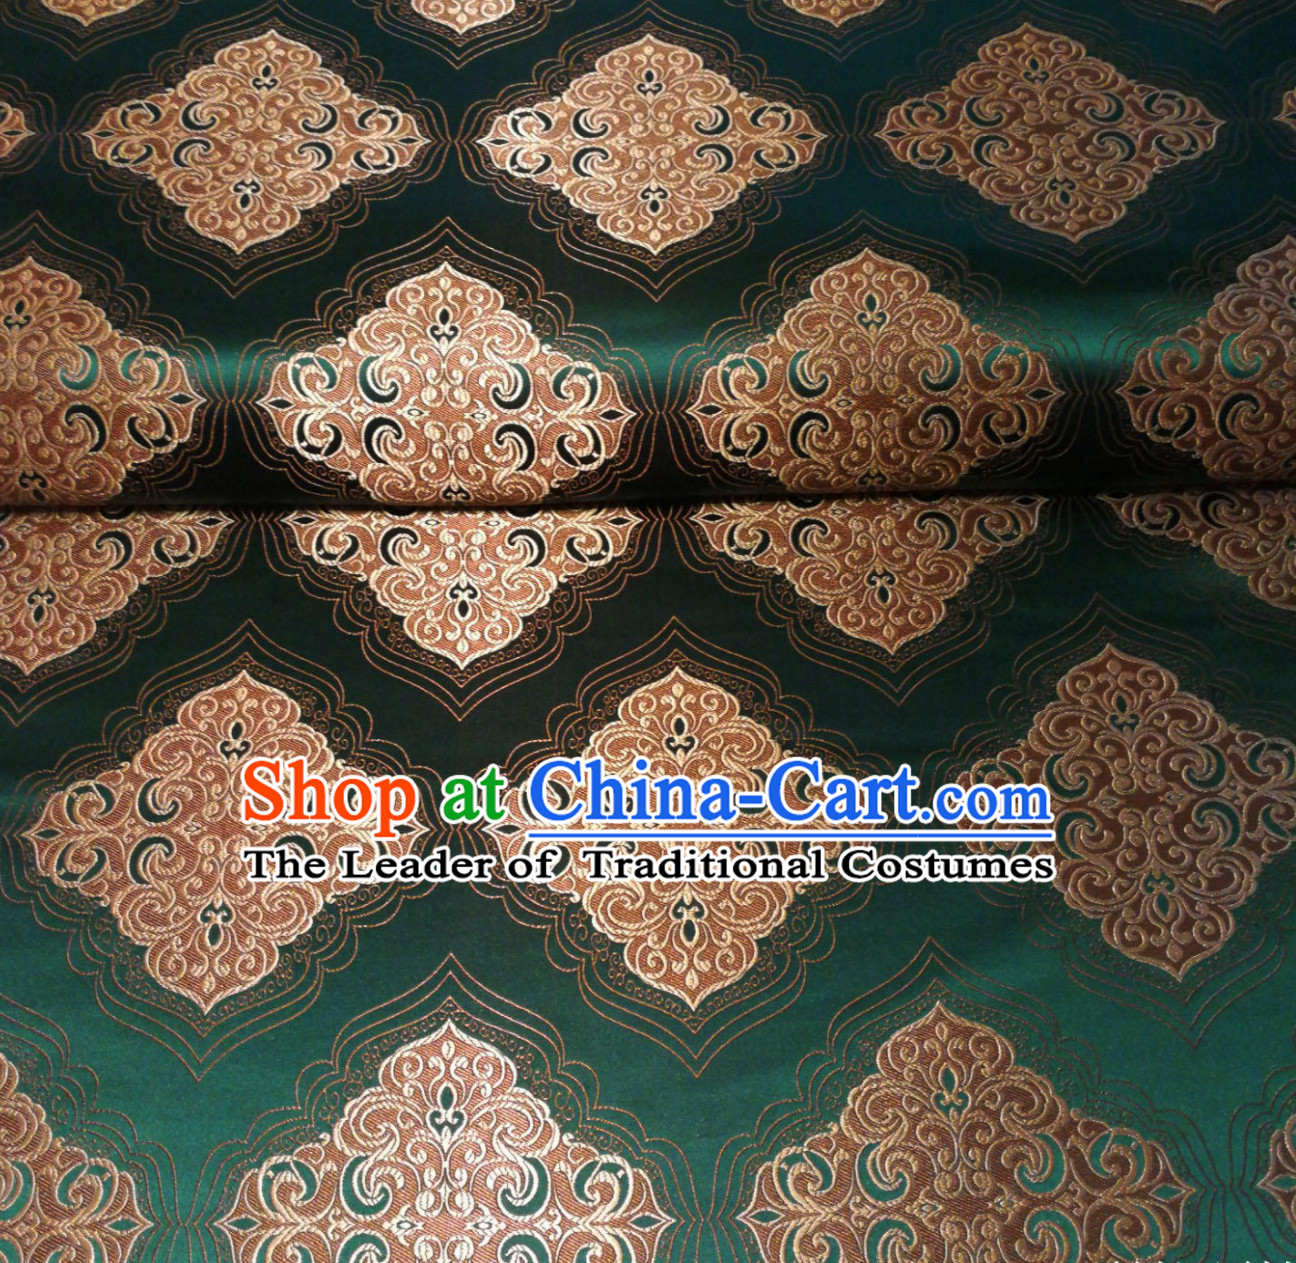 Royal Green Chinese Royal Palace Style Traditional Pattern Design Brocade Fabric Silk Fabric Chinese Fabric Asian Material